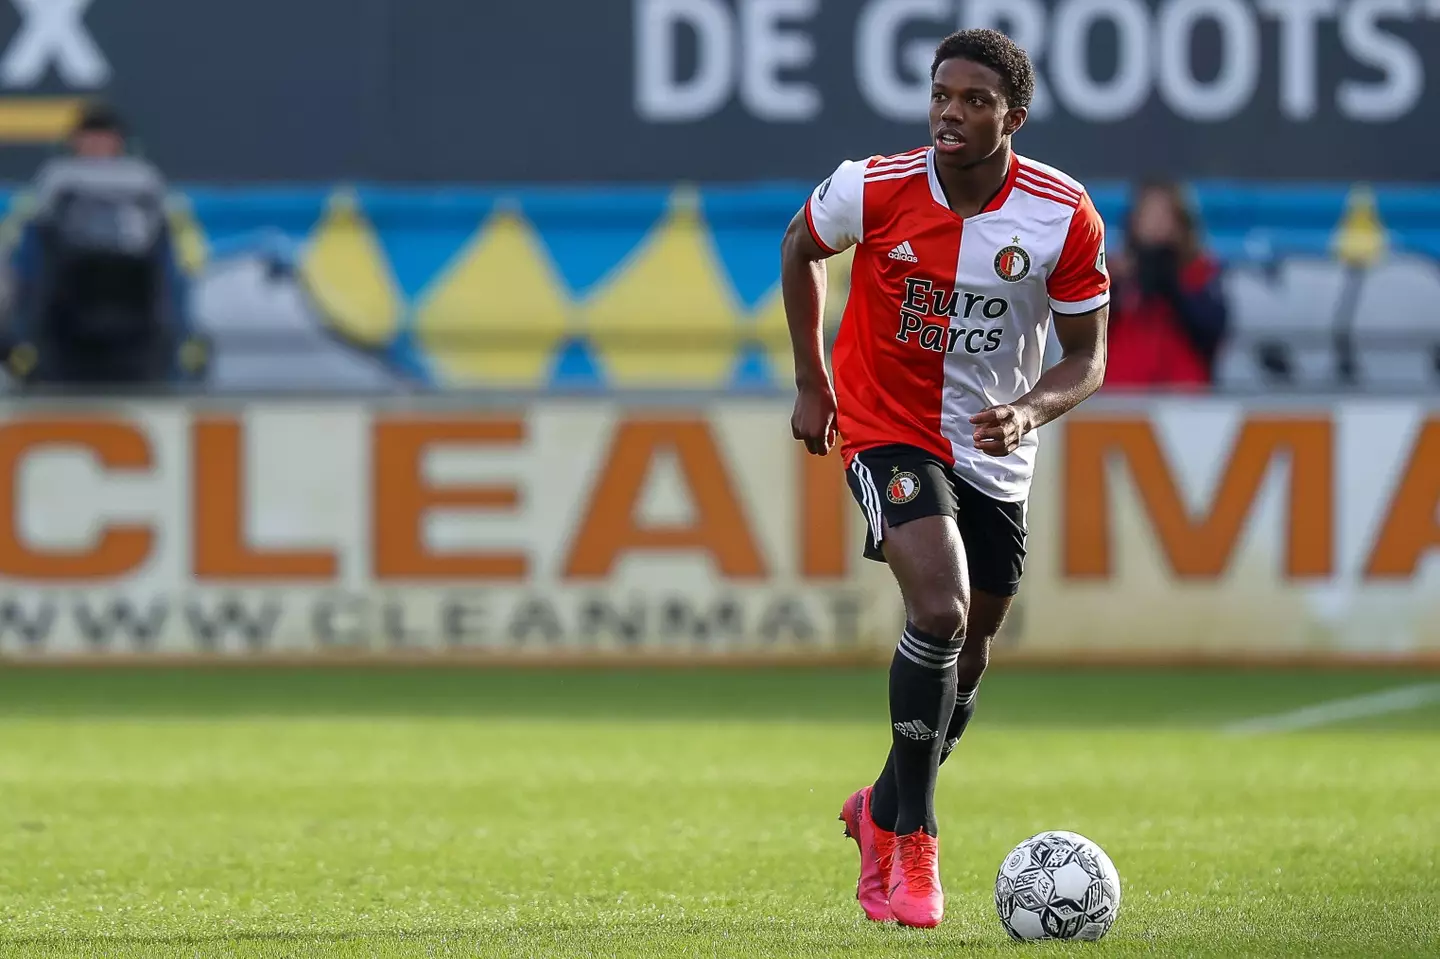 United are close to agreeing a deal for Feyenoord's Tyrell Malacia (Image: Alamy)